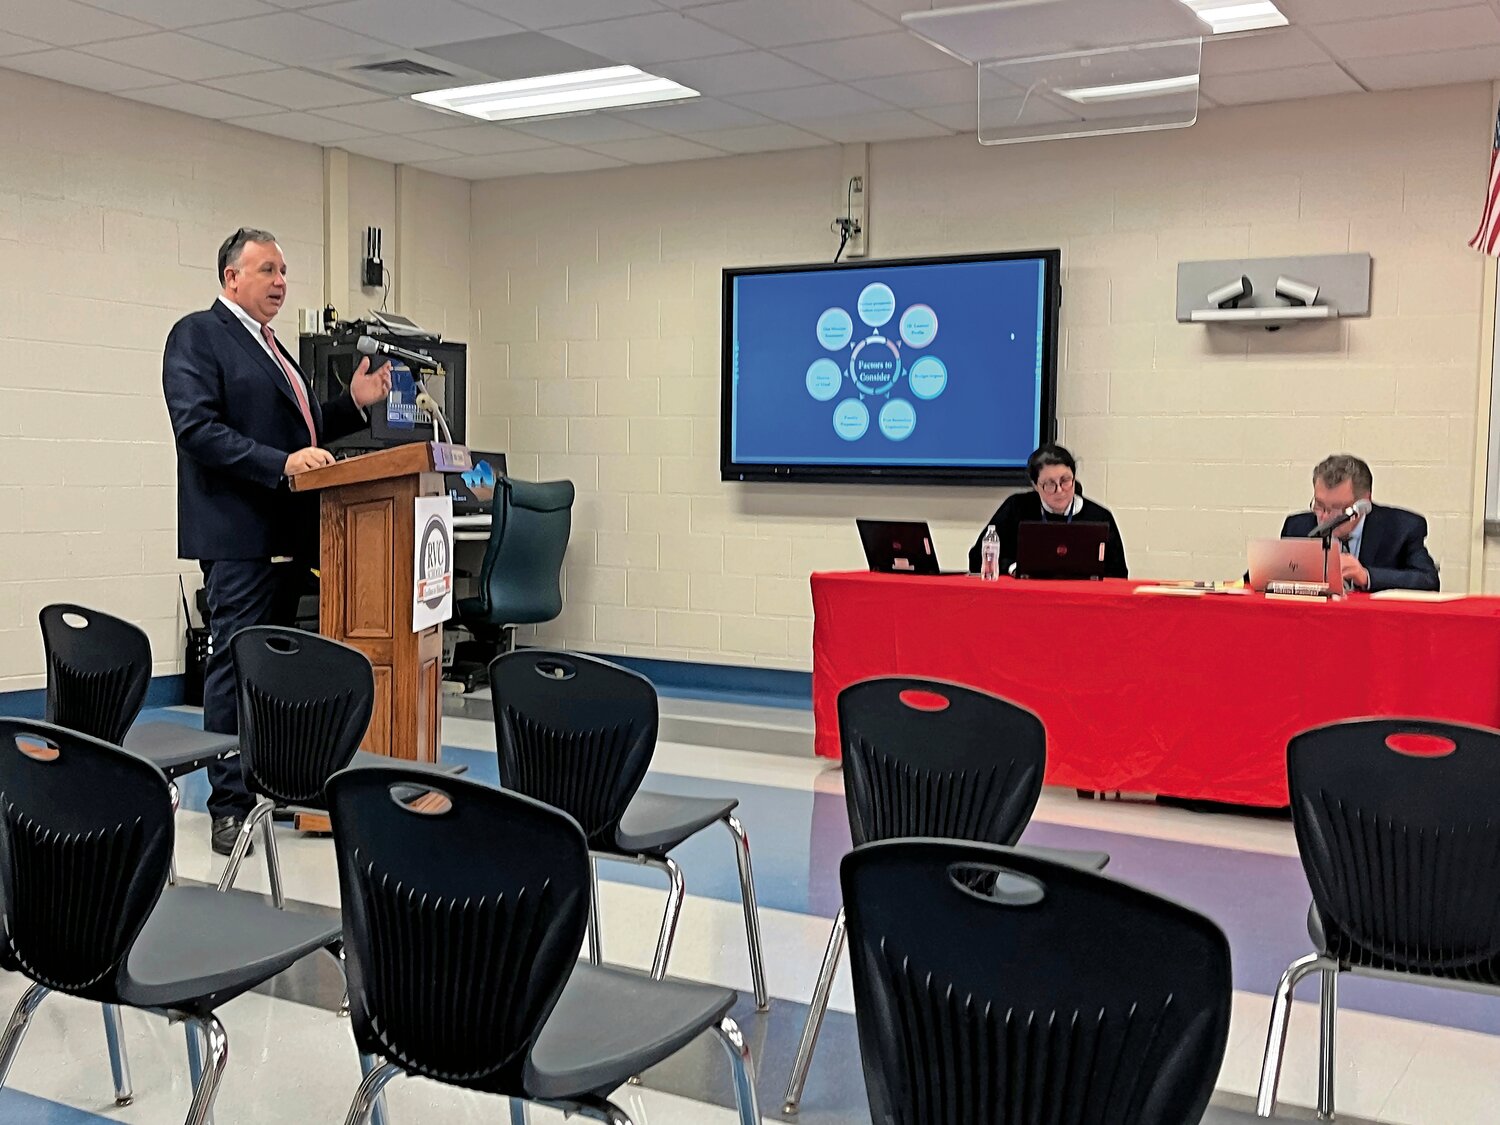 Following a presentation on the results of the Rockville Centre School District’s value survey, Superintendent Matt Gaven provided a rundown of new courses being added to the curriculum for the 2024-2025 school year.